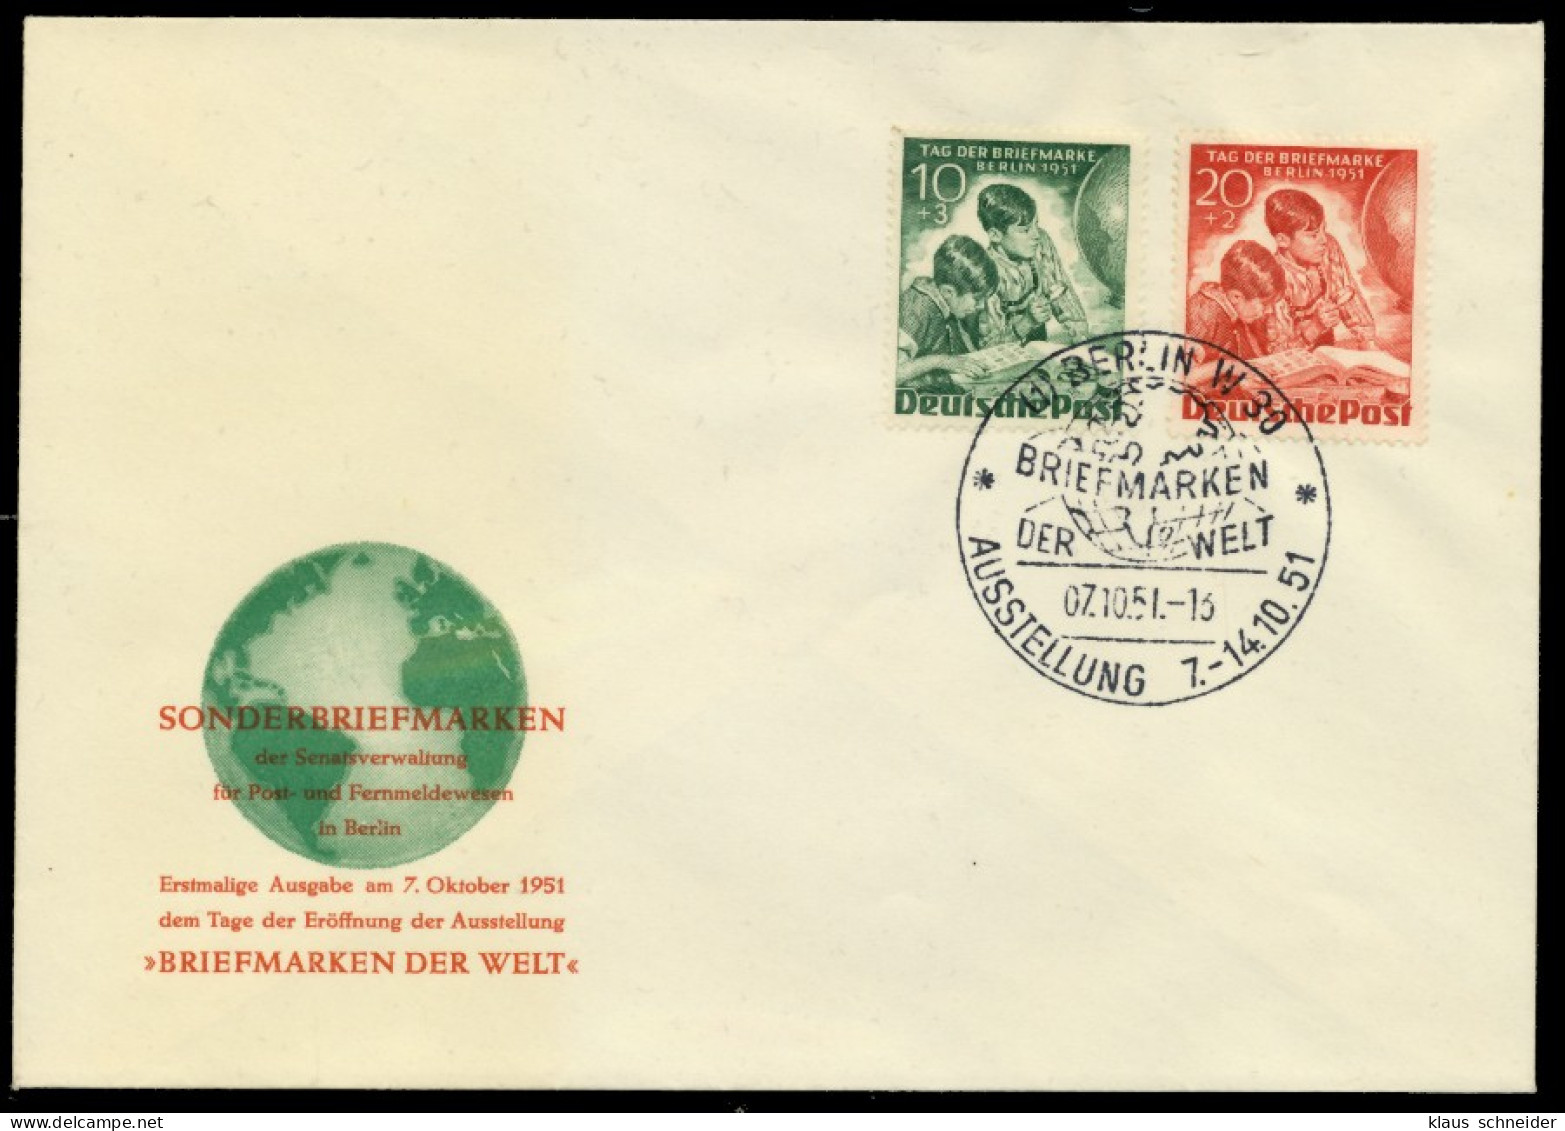 BERLIN 1951 Nr 80-81 BRIEF FDC X6E2D22 - Covers & Documents